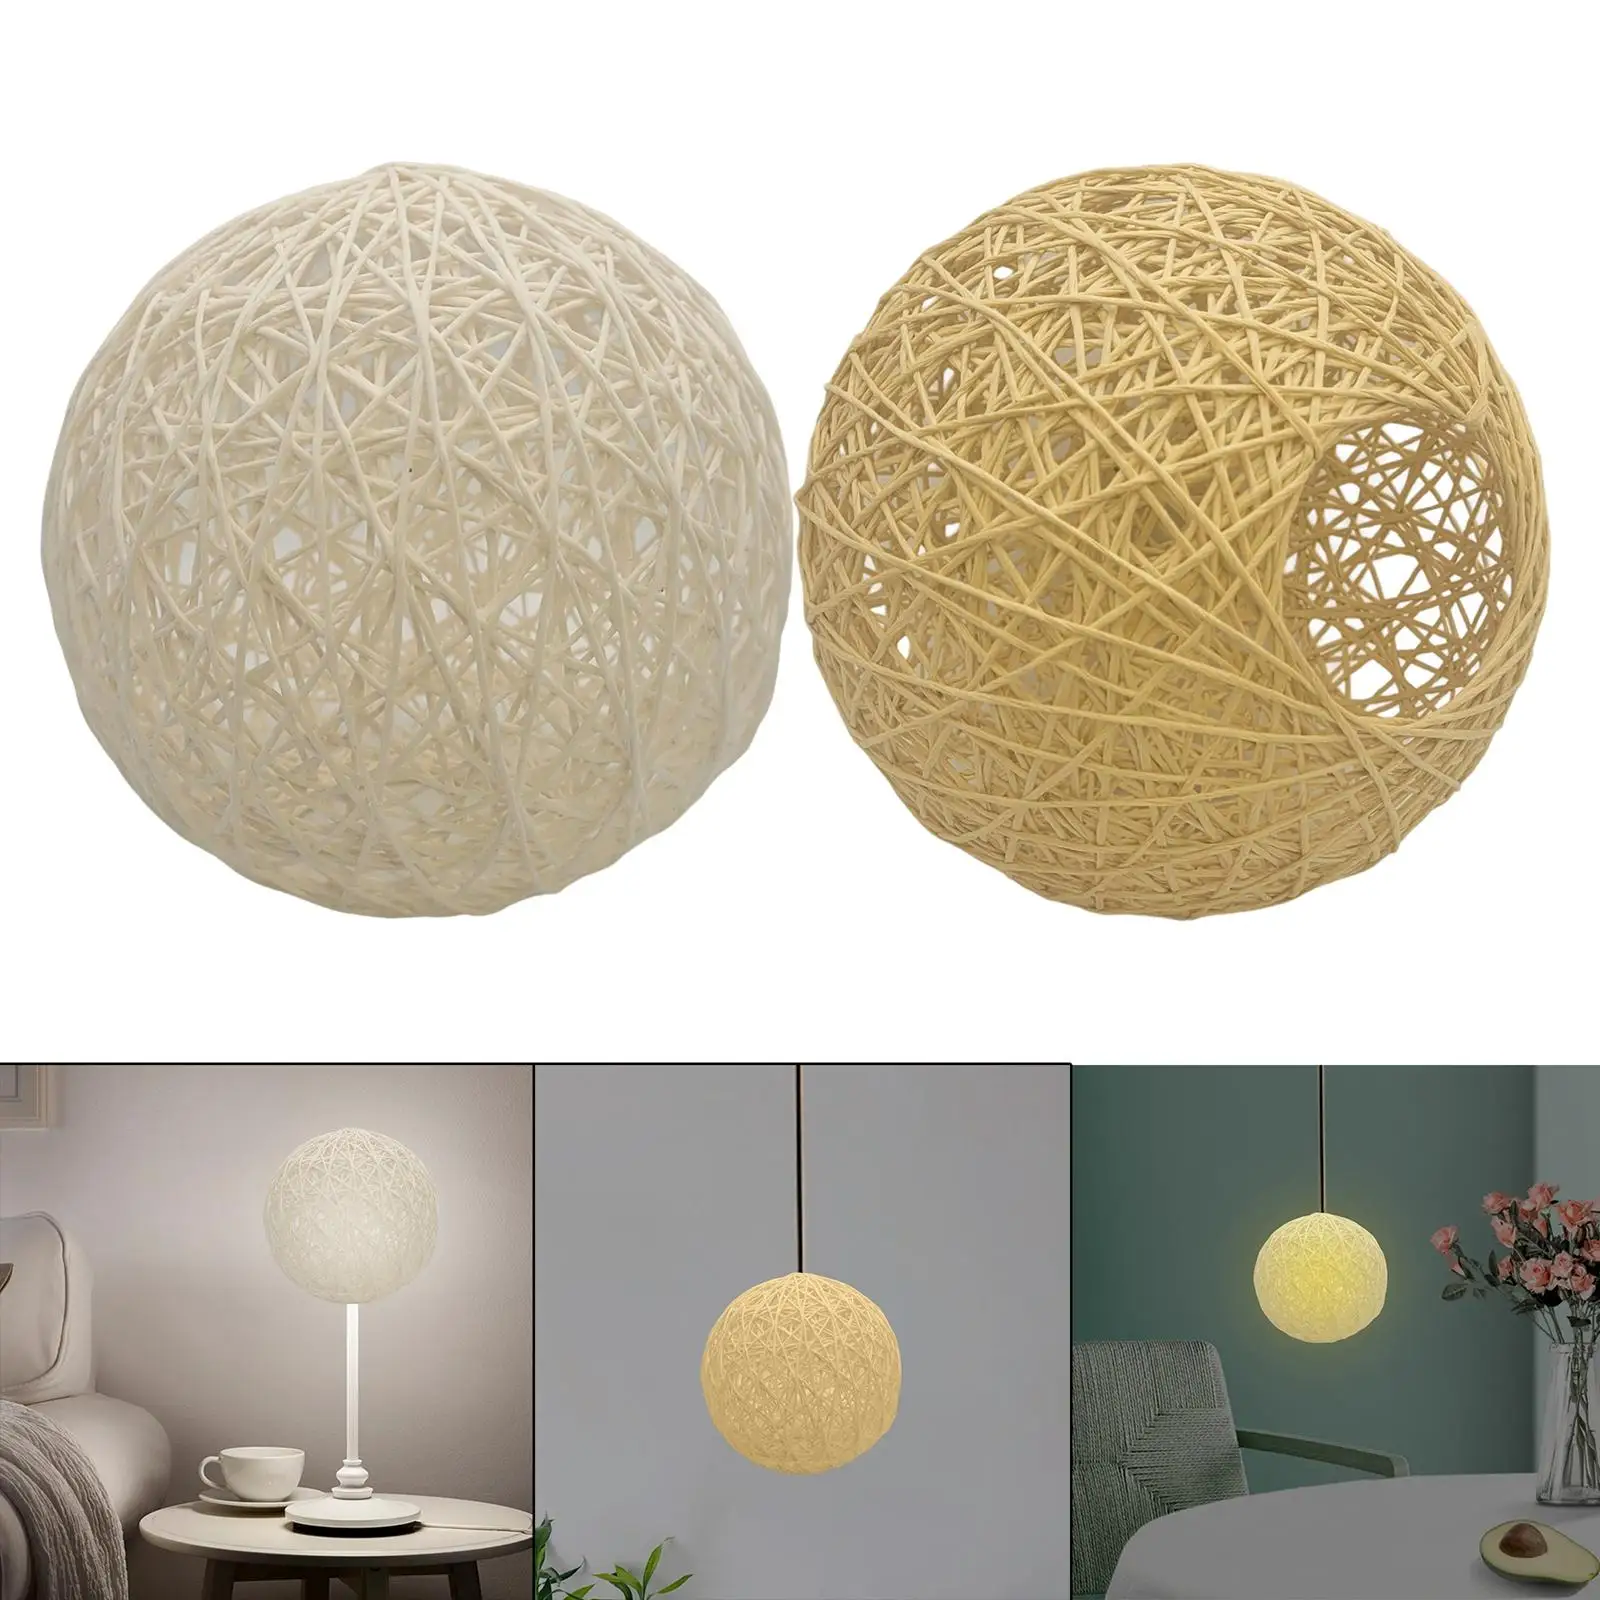 Woven Pendant Light Shade Basket Chandelier Lamp Shade Lamp Cover Decorative Rattan Lampshade for Bar Tea House Dining Room Cafe